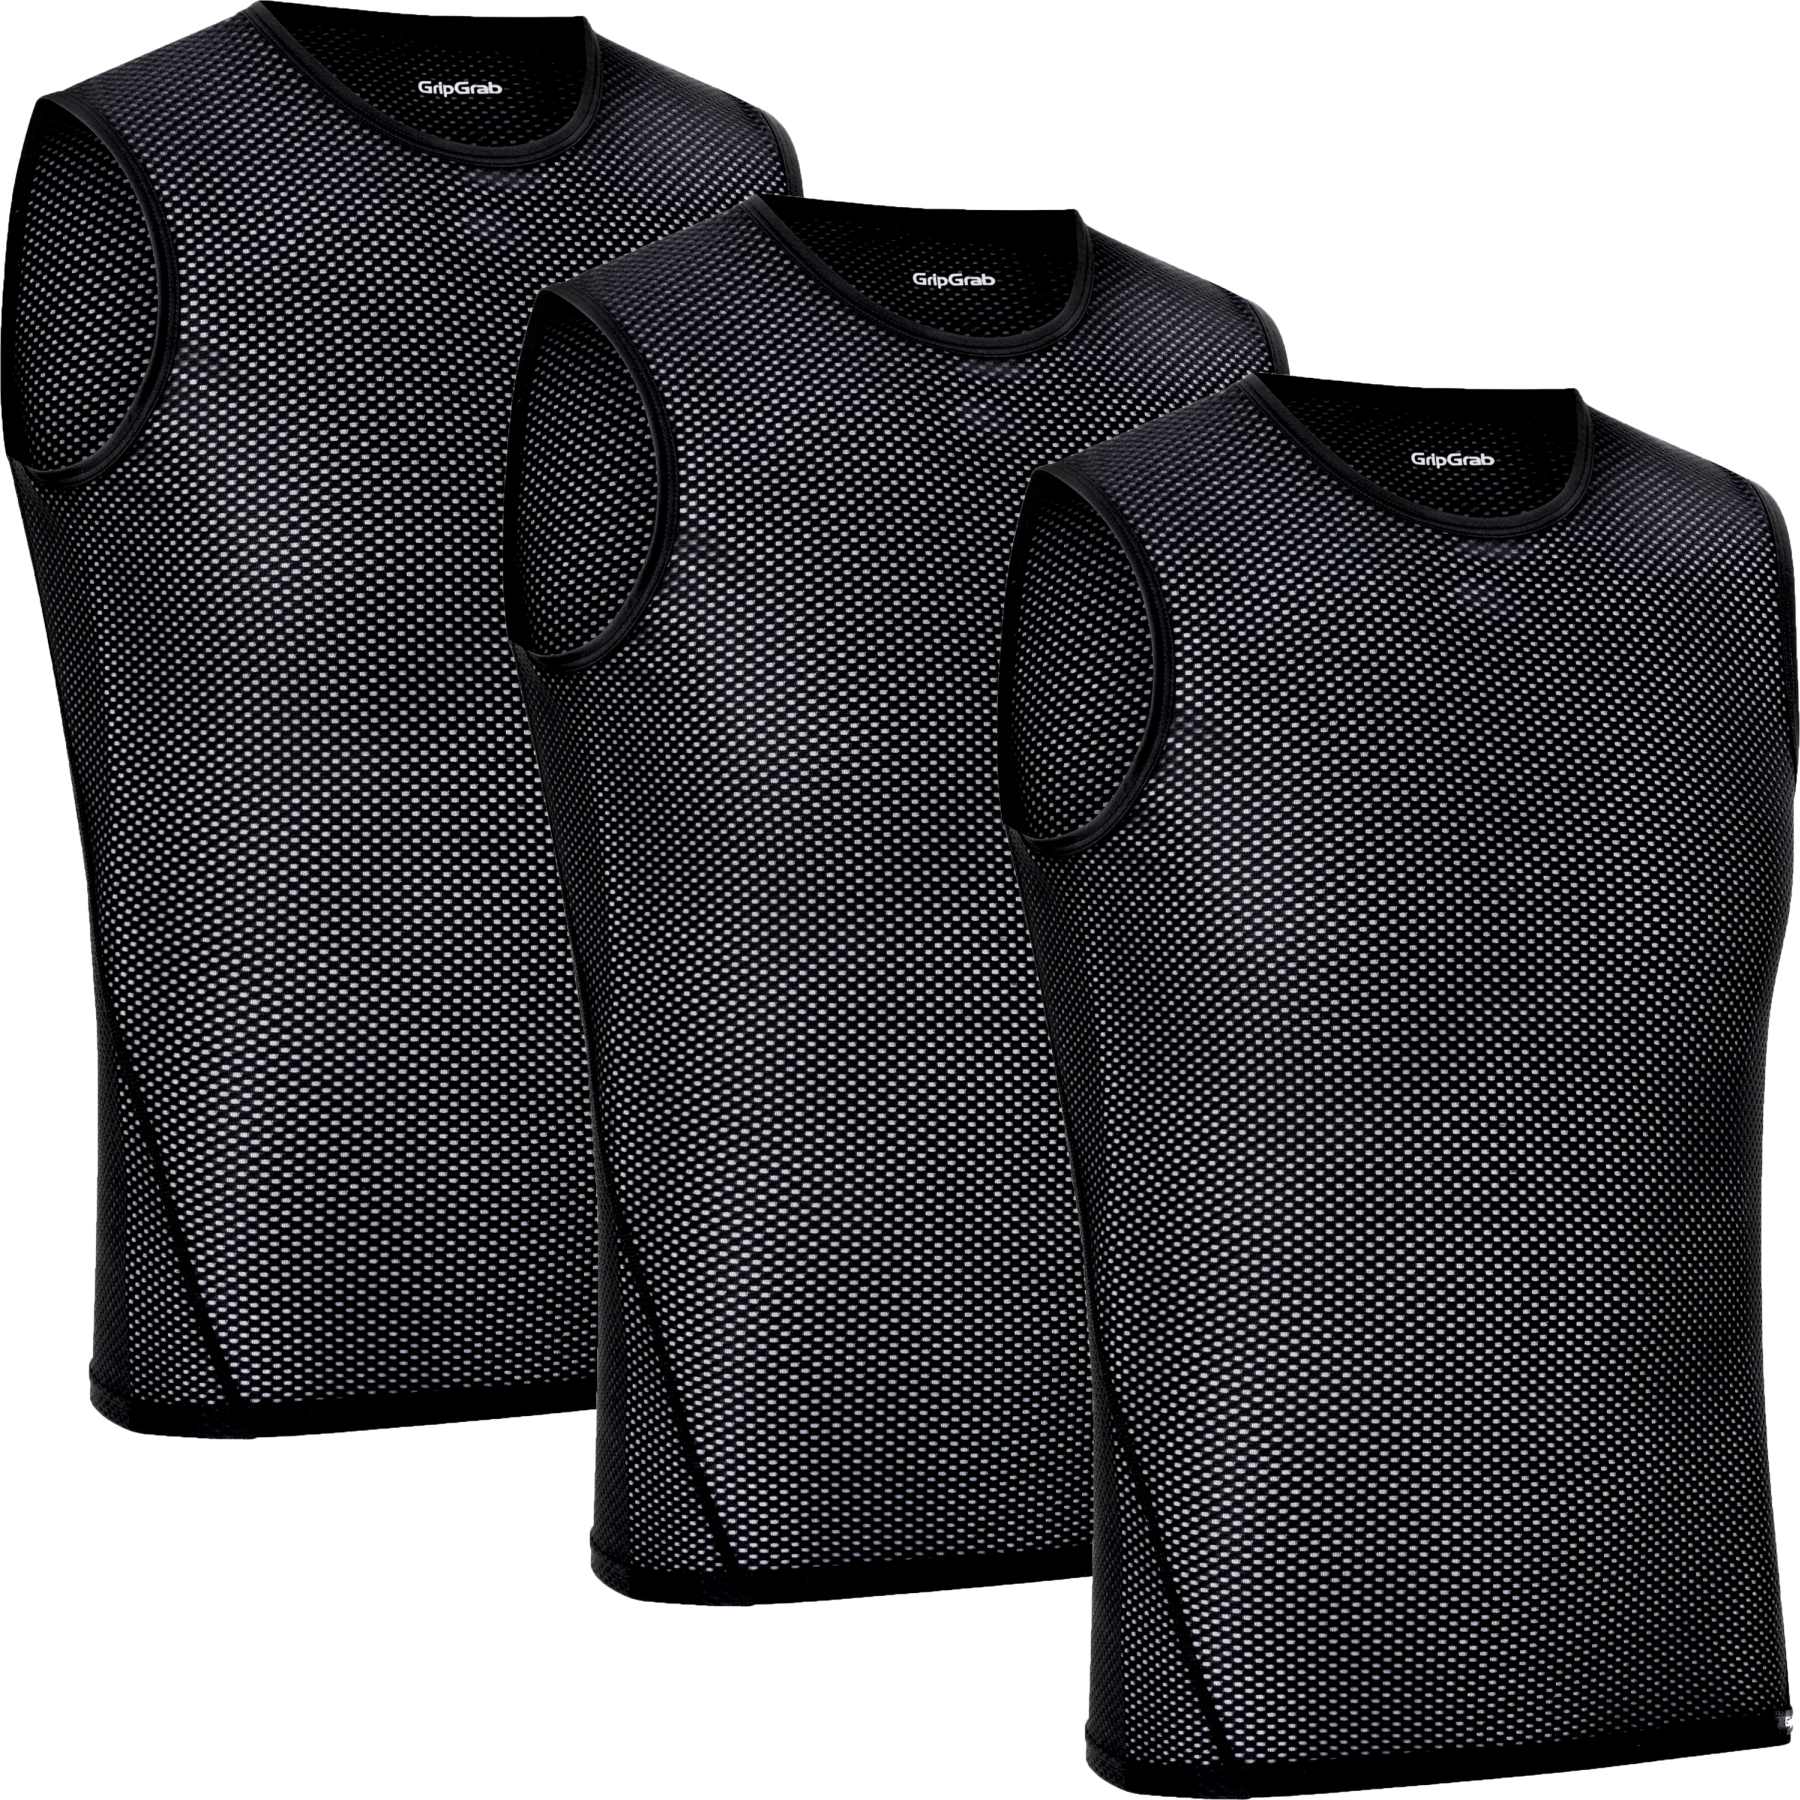 Picture of GripGrab Ultralight Sleeveless Mesh Baselayer 3PACK - Black